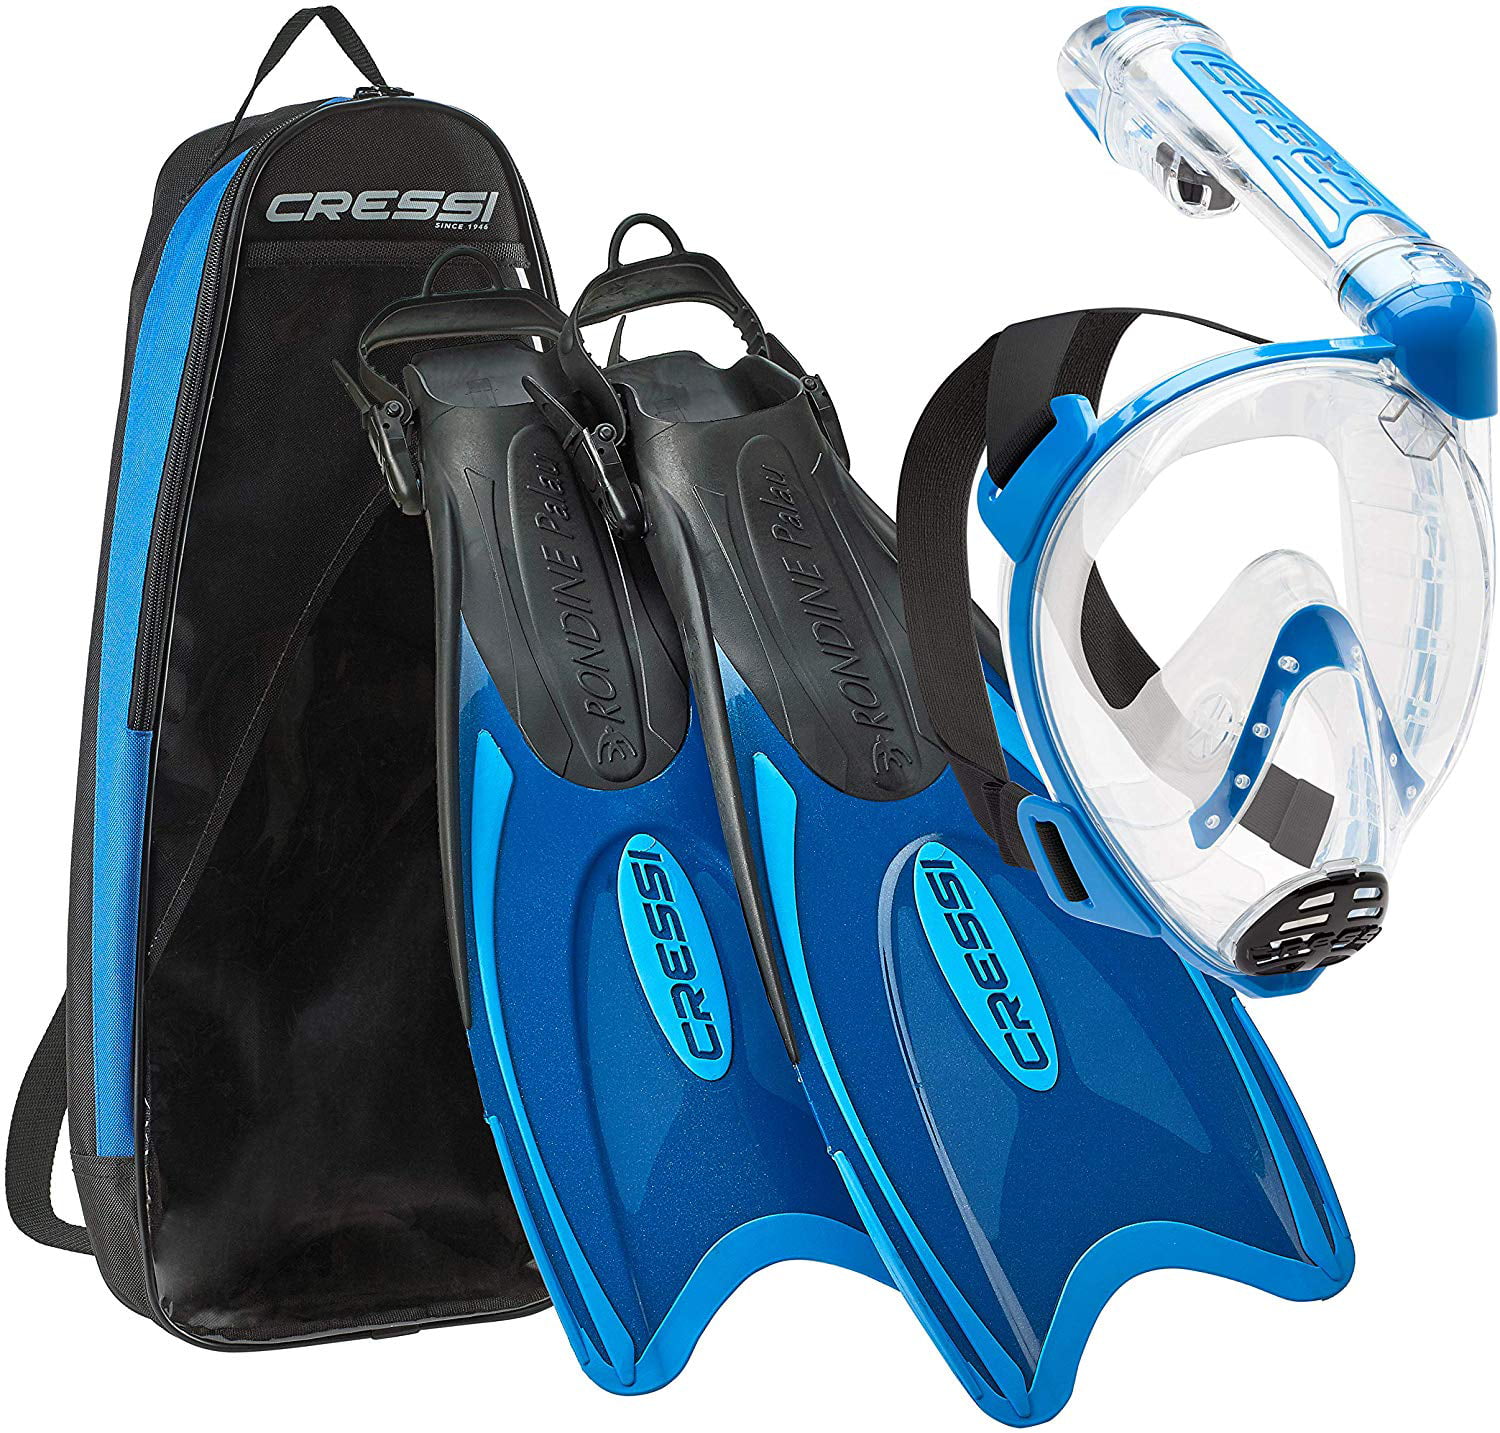 Designed and Manufactured in Italy Cressi Palau Mask Fin Snorkel Set with Snorkeling Gear Bag 